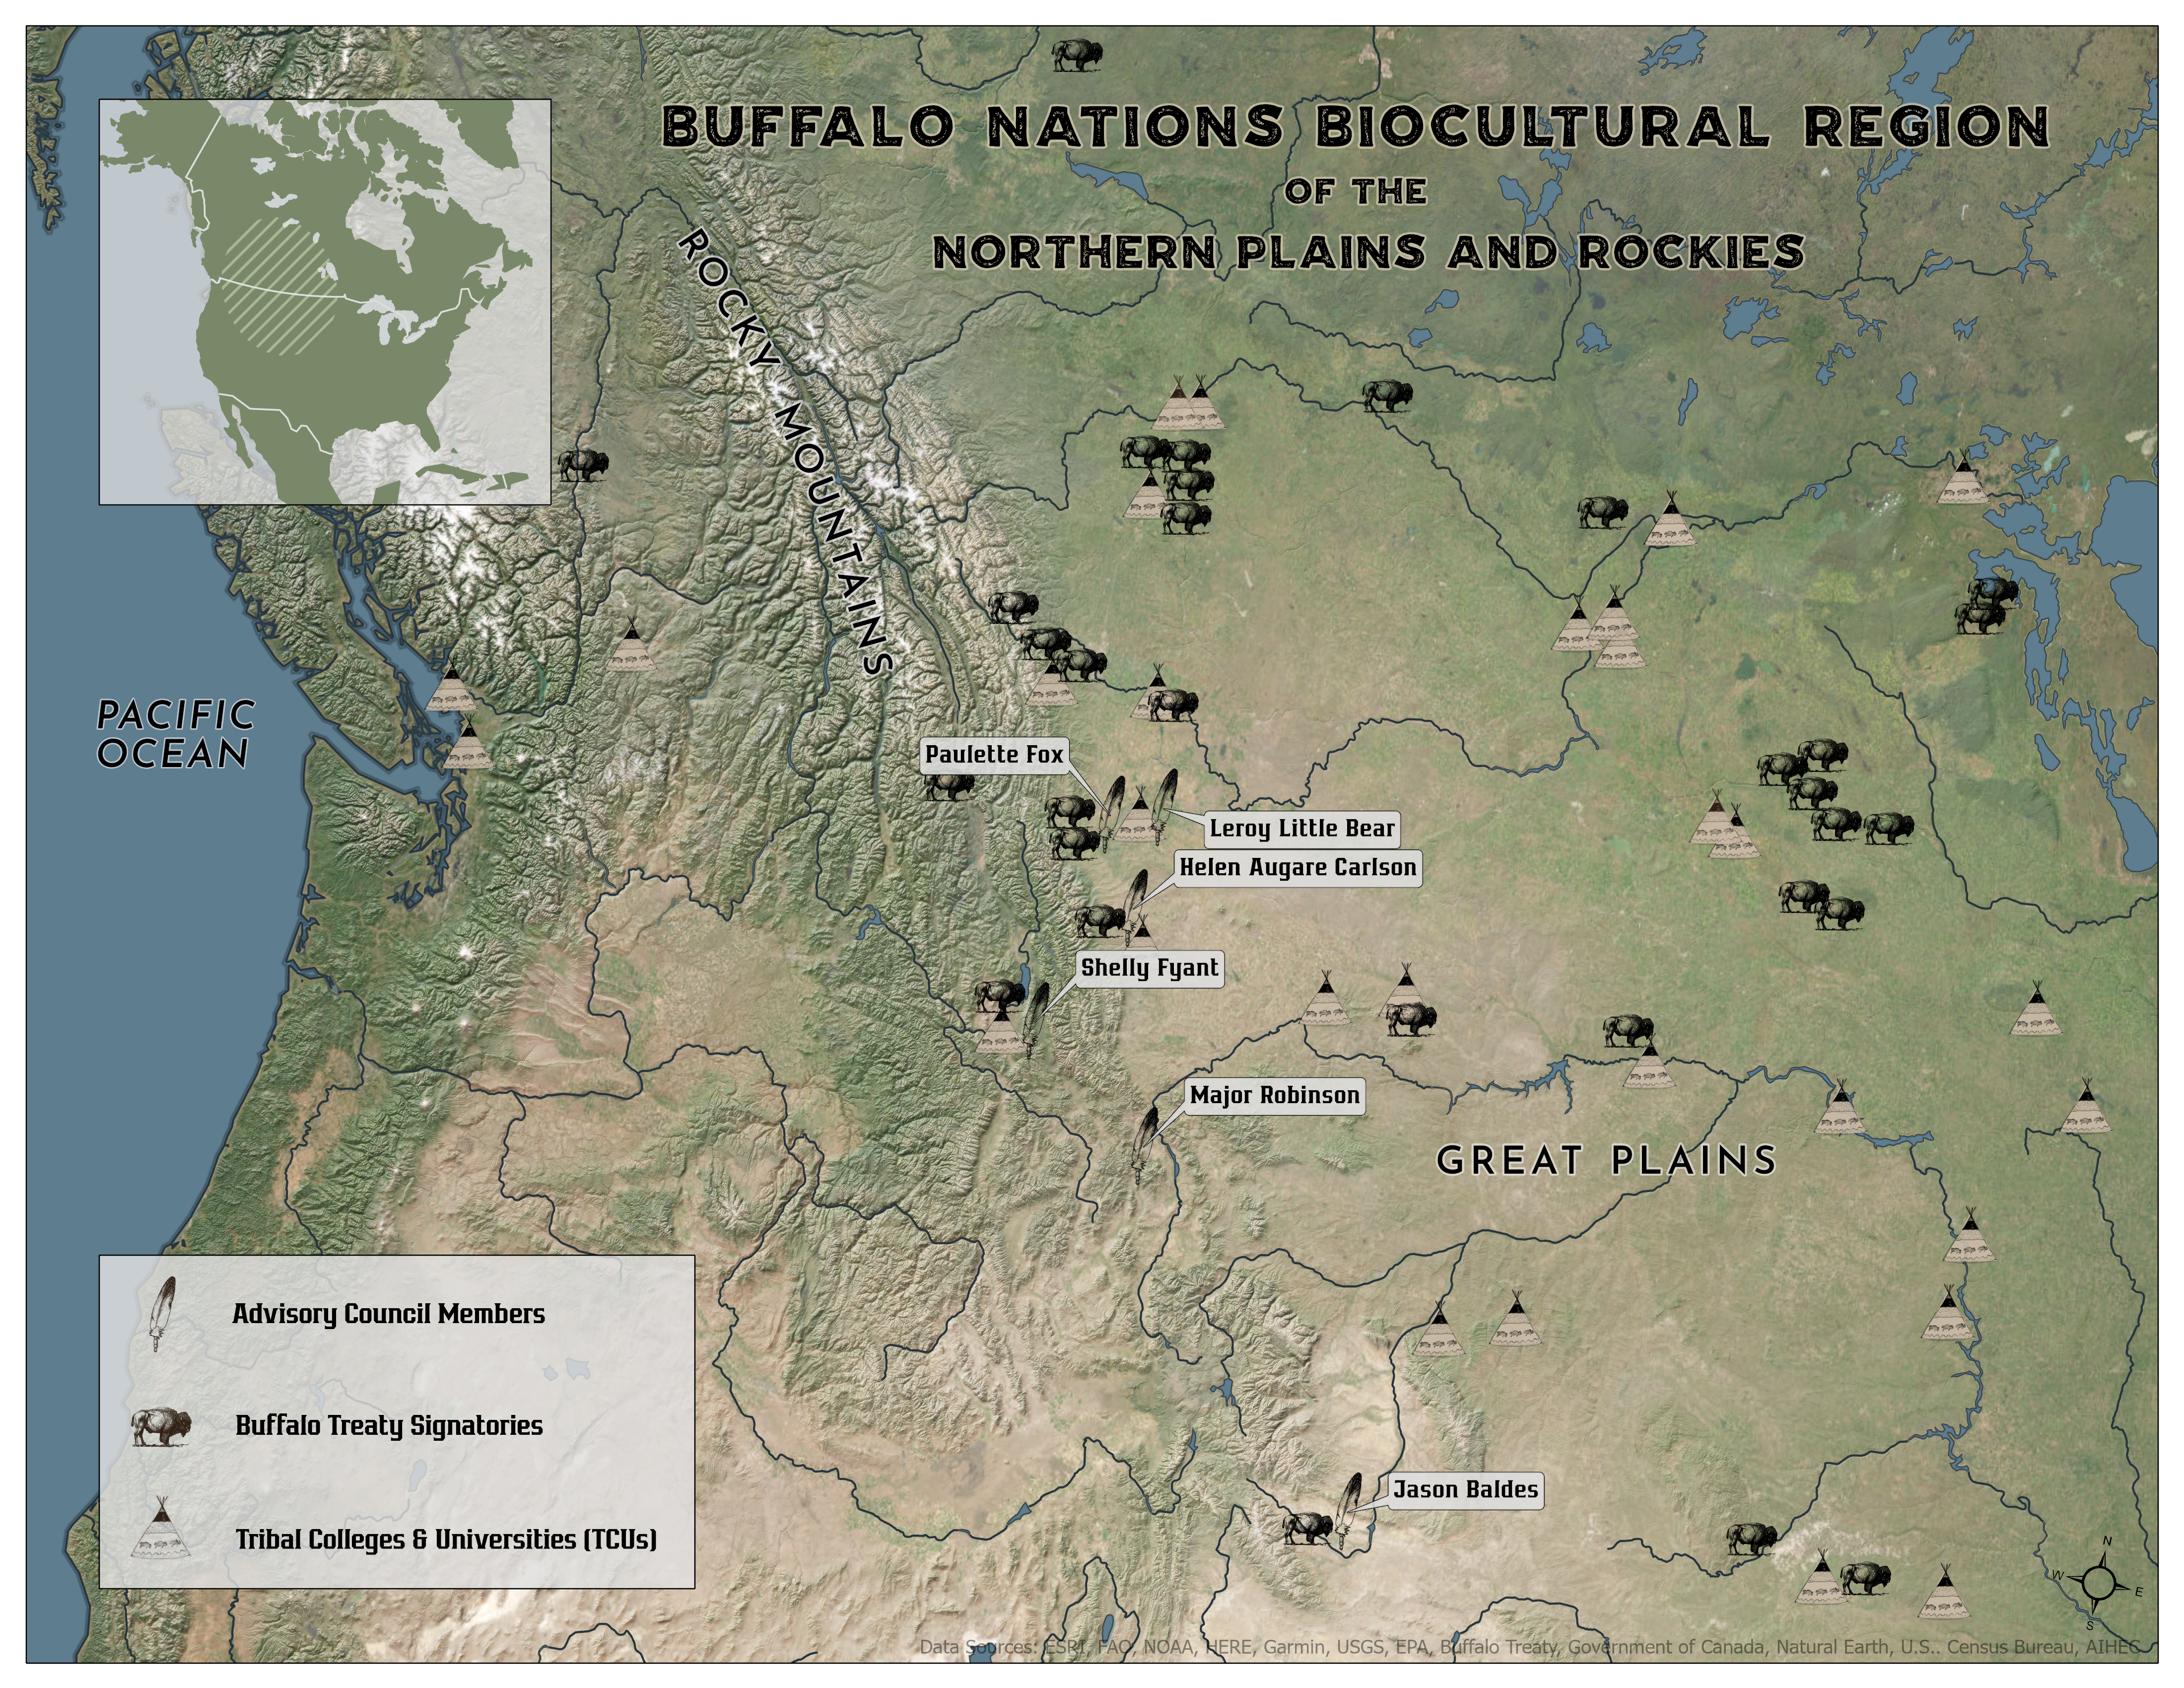 Buffalo Nations Biocultural Region of the Northern Plains and Rockies